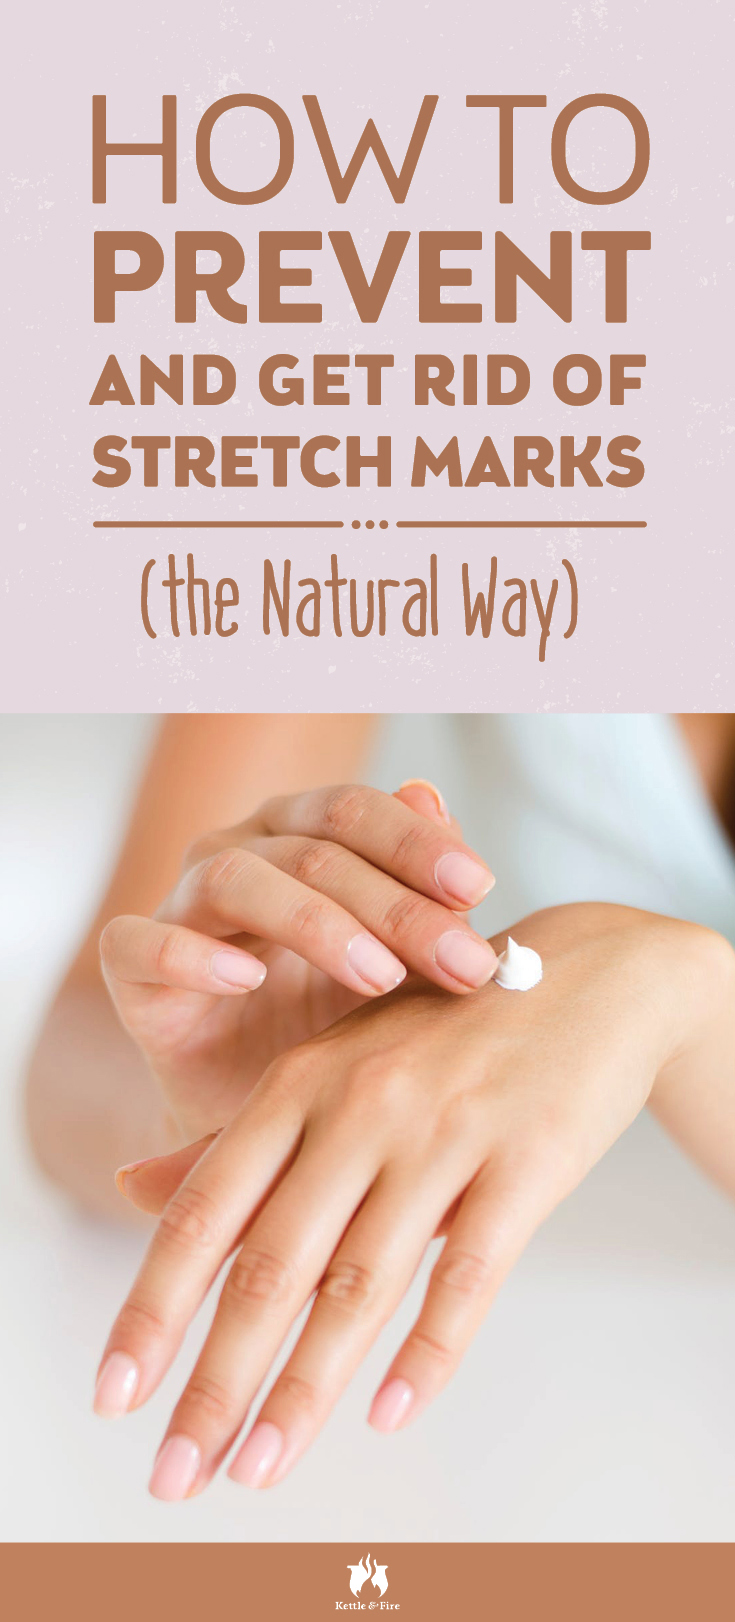 Stretch marks. They can happen to anyone—and often do. Learn how to get rid of stretch marks and better yet, how to prevent them the natural way. 